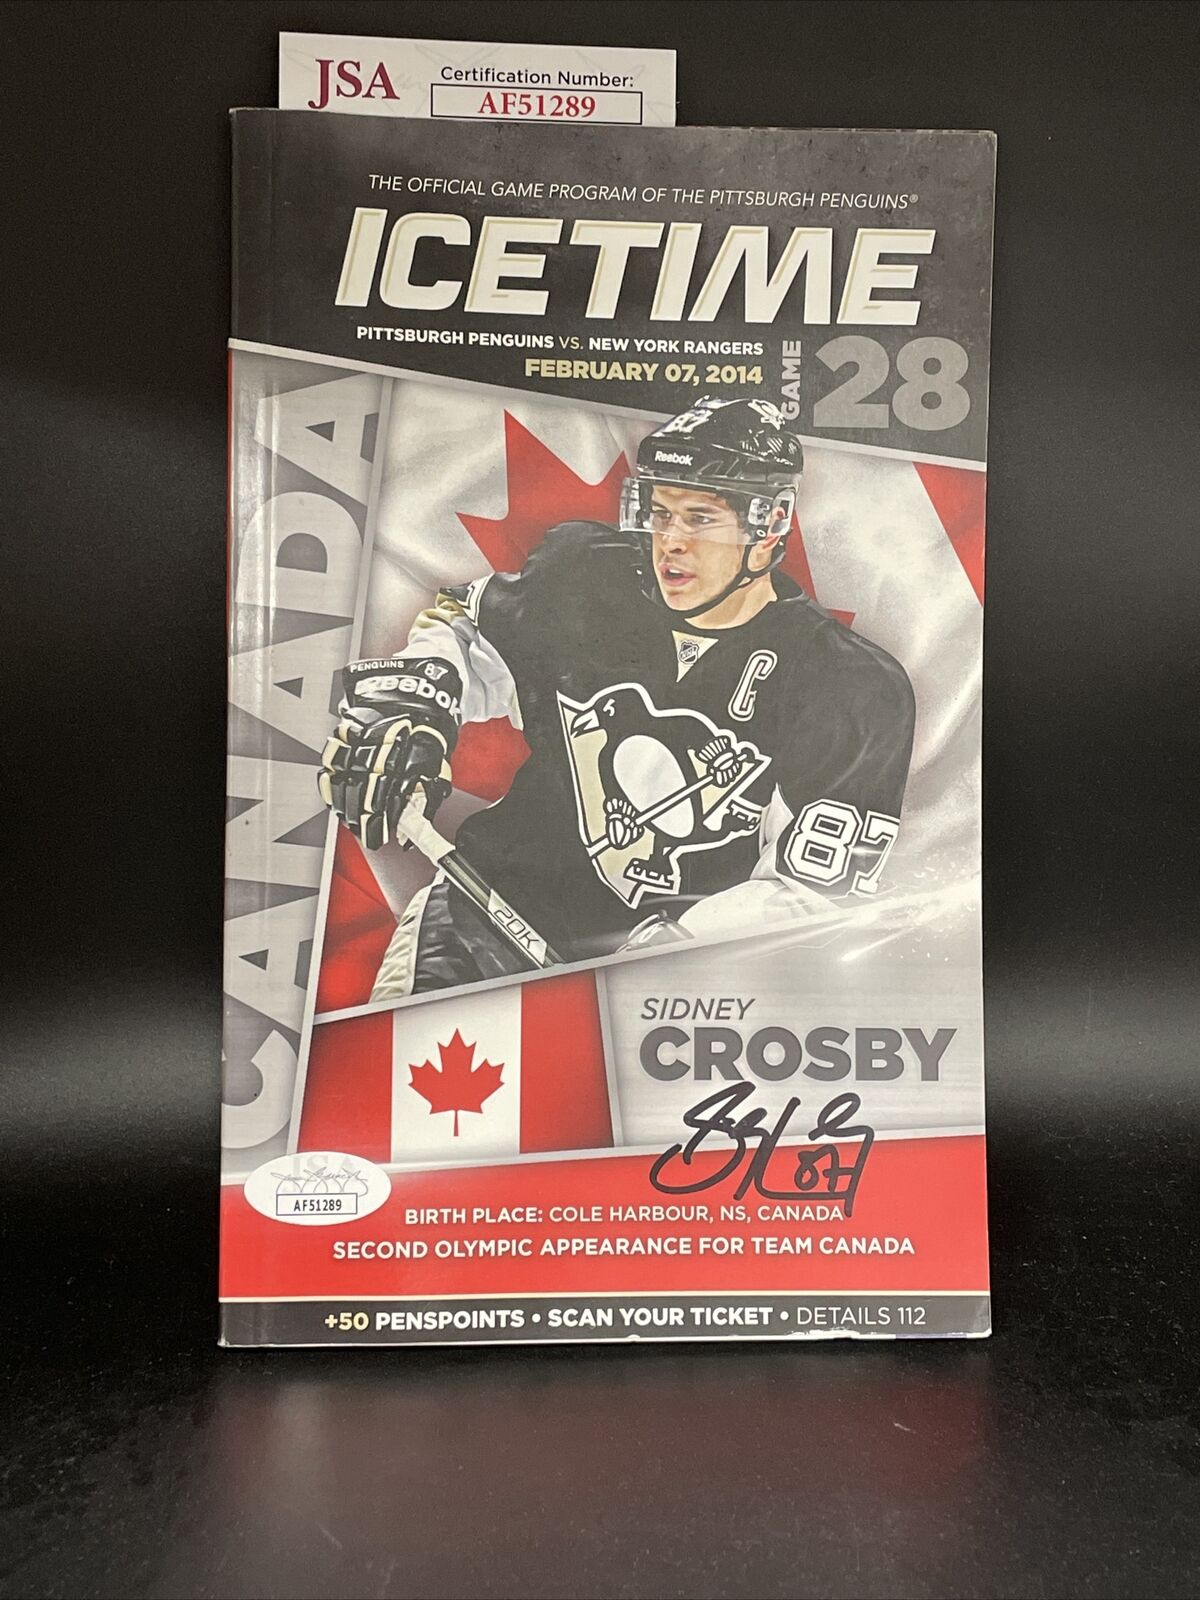 Sidney Crosby Signed Pittsburgh Penguins Ice Time Game Program Auto Jsa